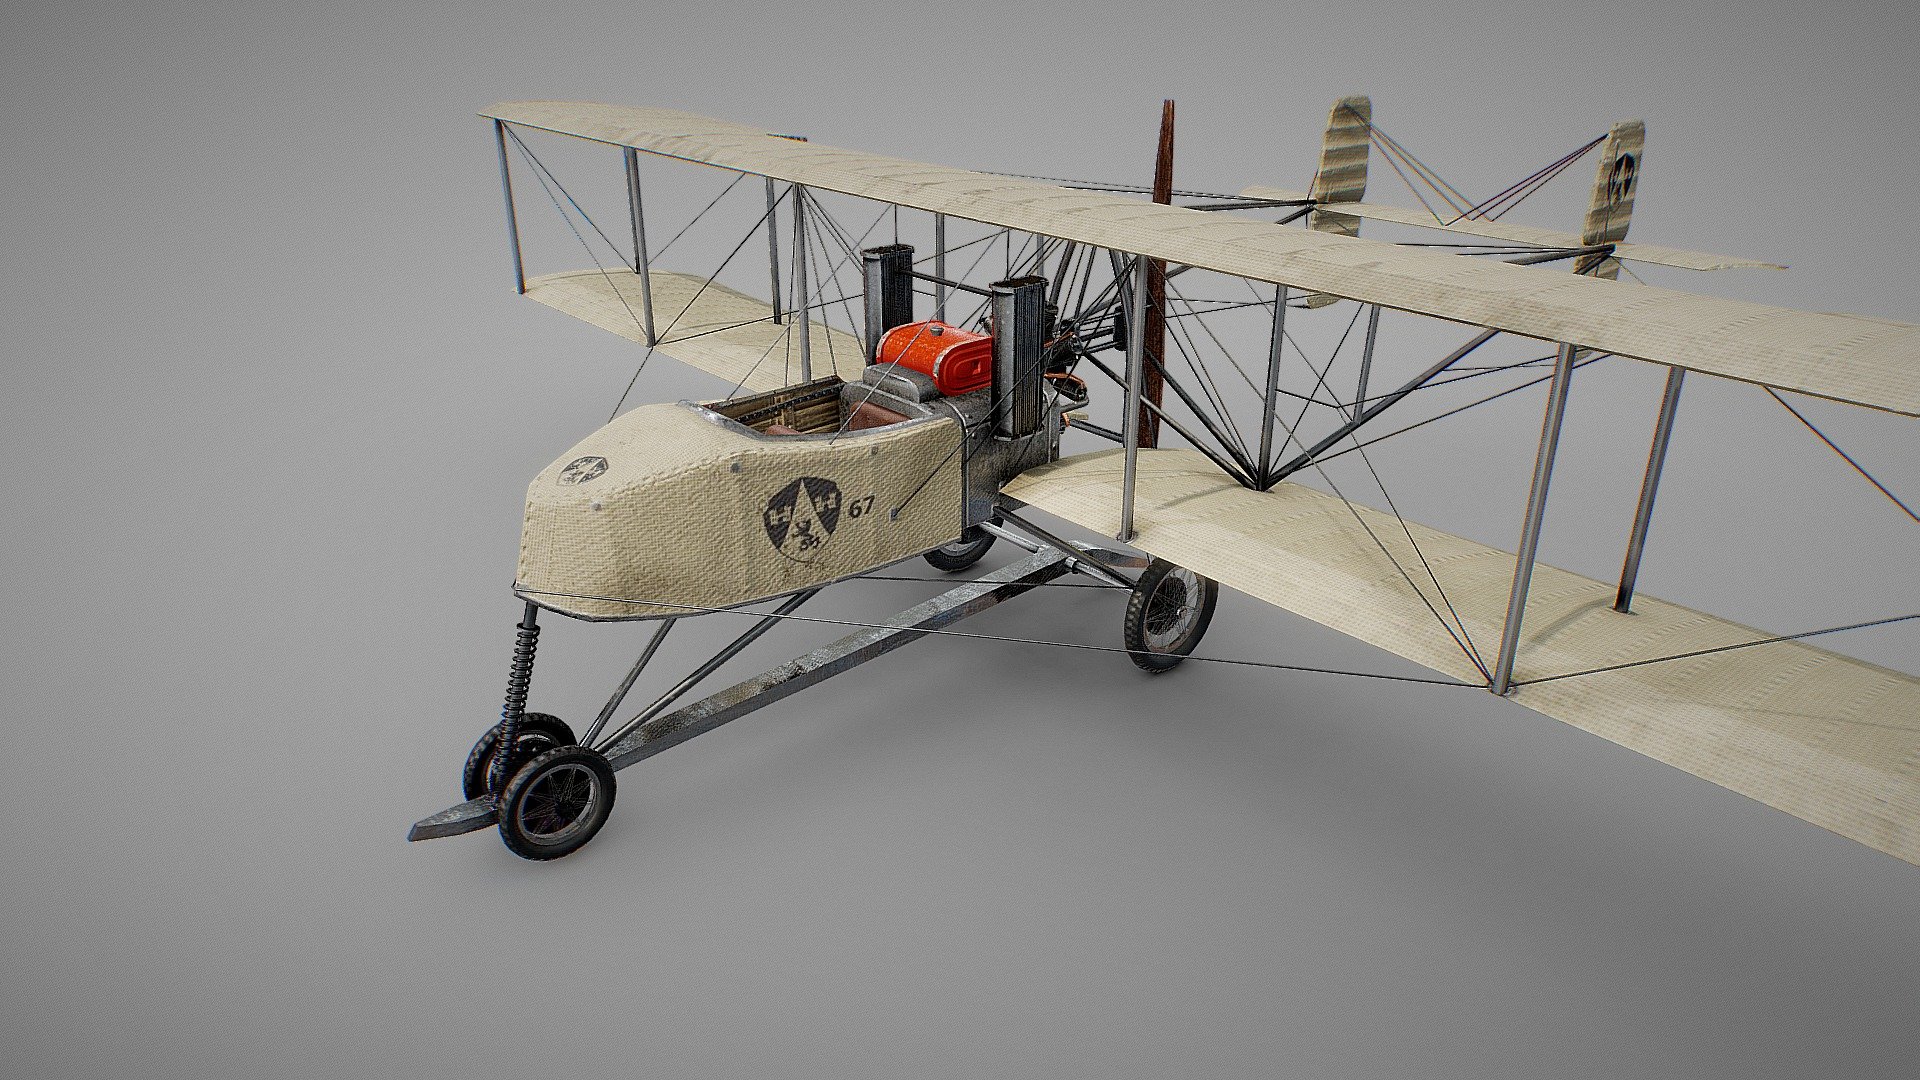 An accurate reproduction of a long forgotten biplane.

The phrase “”More lost than Lieutenant Bello” (“Más perdido que el Teniente Bello”) is a part of Chile’s linguistic heritage and refers to someone who loses their way quite badly.  Yet where did the phrase come from?  Well, it turns out the “Lieutenant Bello” saying pays homage to an early aviator whose full name was Alejandro Bello Silva and who was one of the Chilean military’s very first military pilots.  As you might imagine, Lt. Bello did indeed get lost while flying — so lost, in fact, that his airplane and his body have never been found, even to this day.

This is the story of the mystery of Lt. Alejandro Bello Silva’s disappearance. 99 years ago today in aviation history.  On March 9, 1914, Lt. Bello took off into the fog and clouds on his final flight to qualify for his military aviator wings — and simply disappeared 3d model